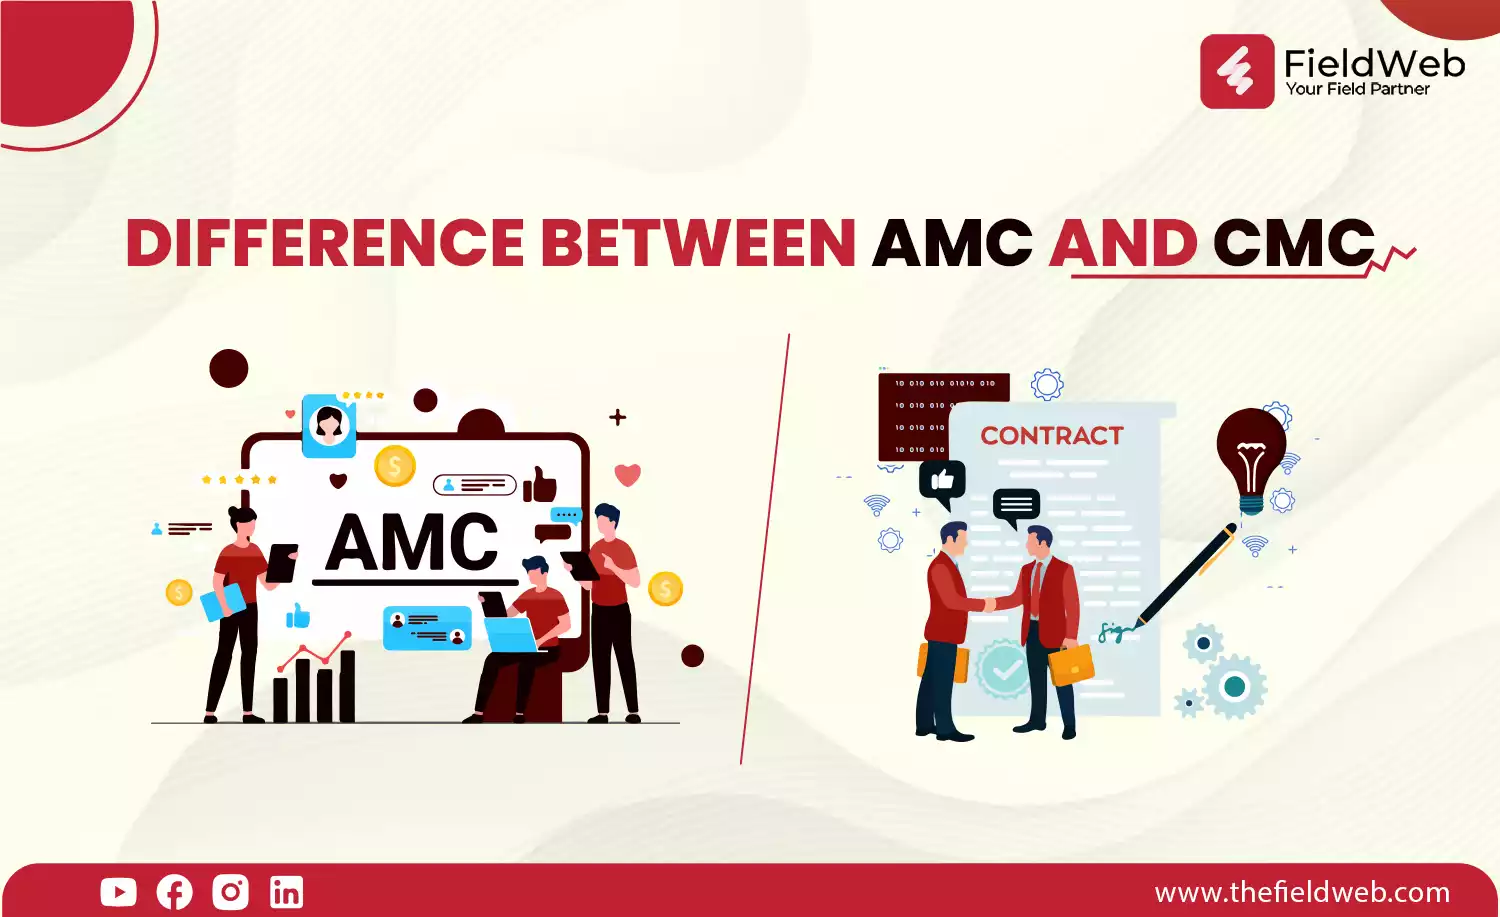 image is displaying the differences between amc and cmc management software